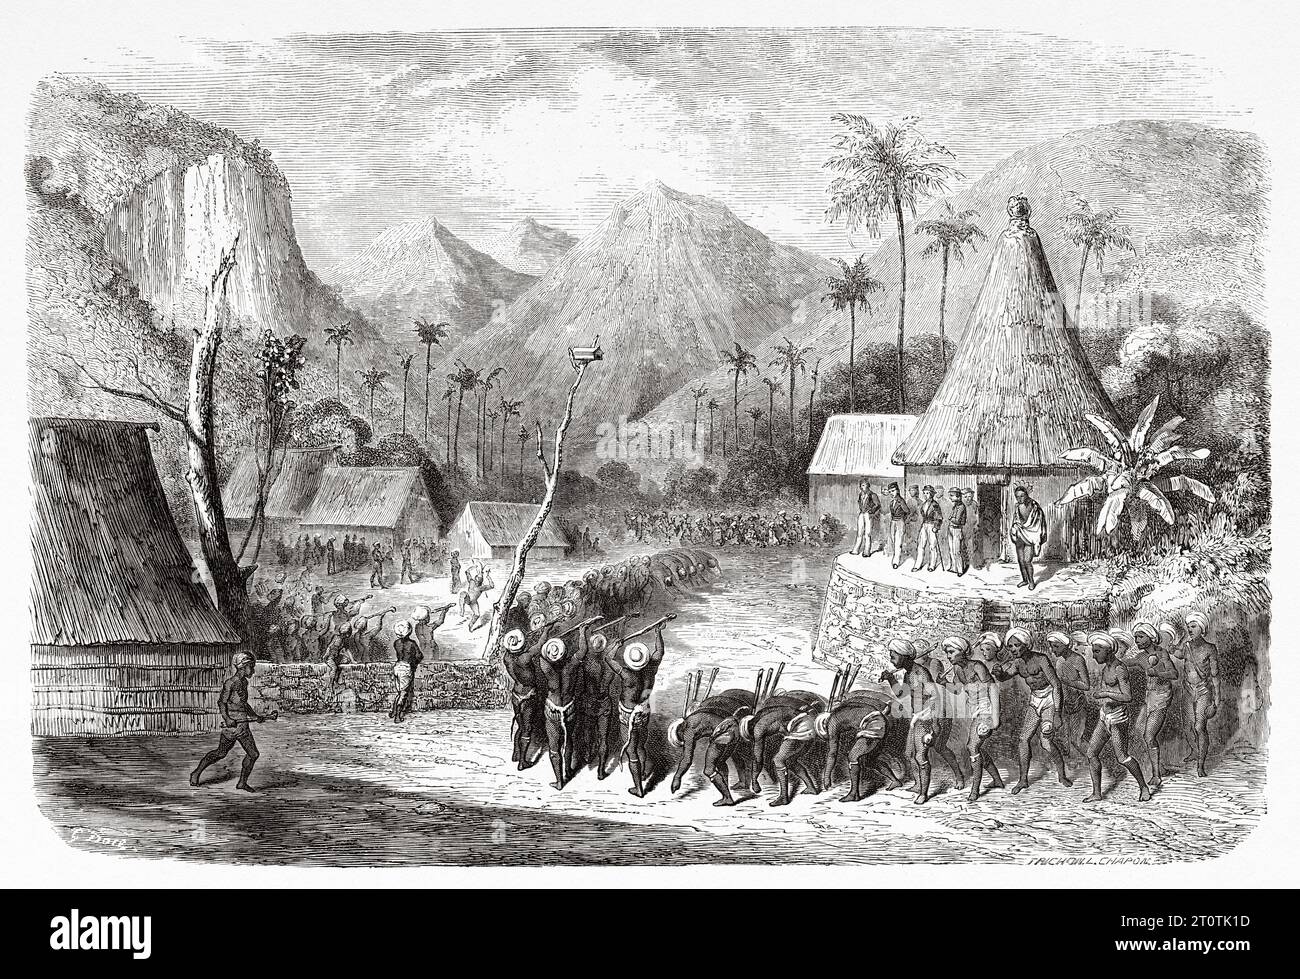 Fiji islands warriors dance, Fiji islands. Melanesia, Oceania in the southwestern Pacific Ocean. Voyage to the Great Viti, great equinoctial ocean by John Denis Macdonald 1855. Old 19th century engraving from Le Tour du Monde 1860 Stock Photo